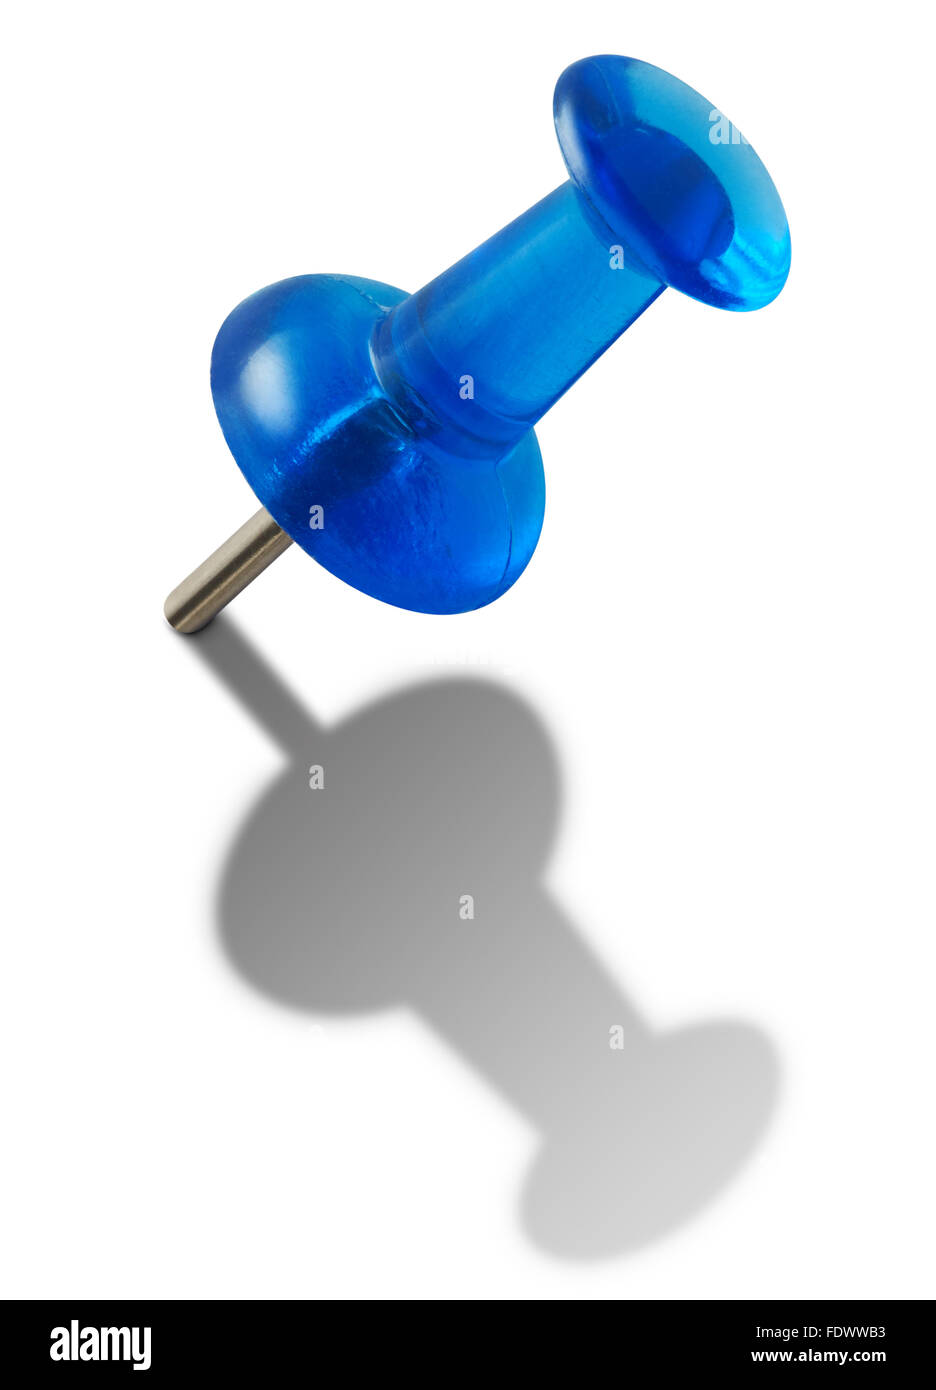 Blue push-pin isolated on the white background, clipping path included. Stock Photo